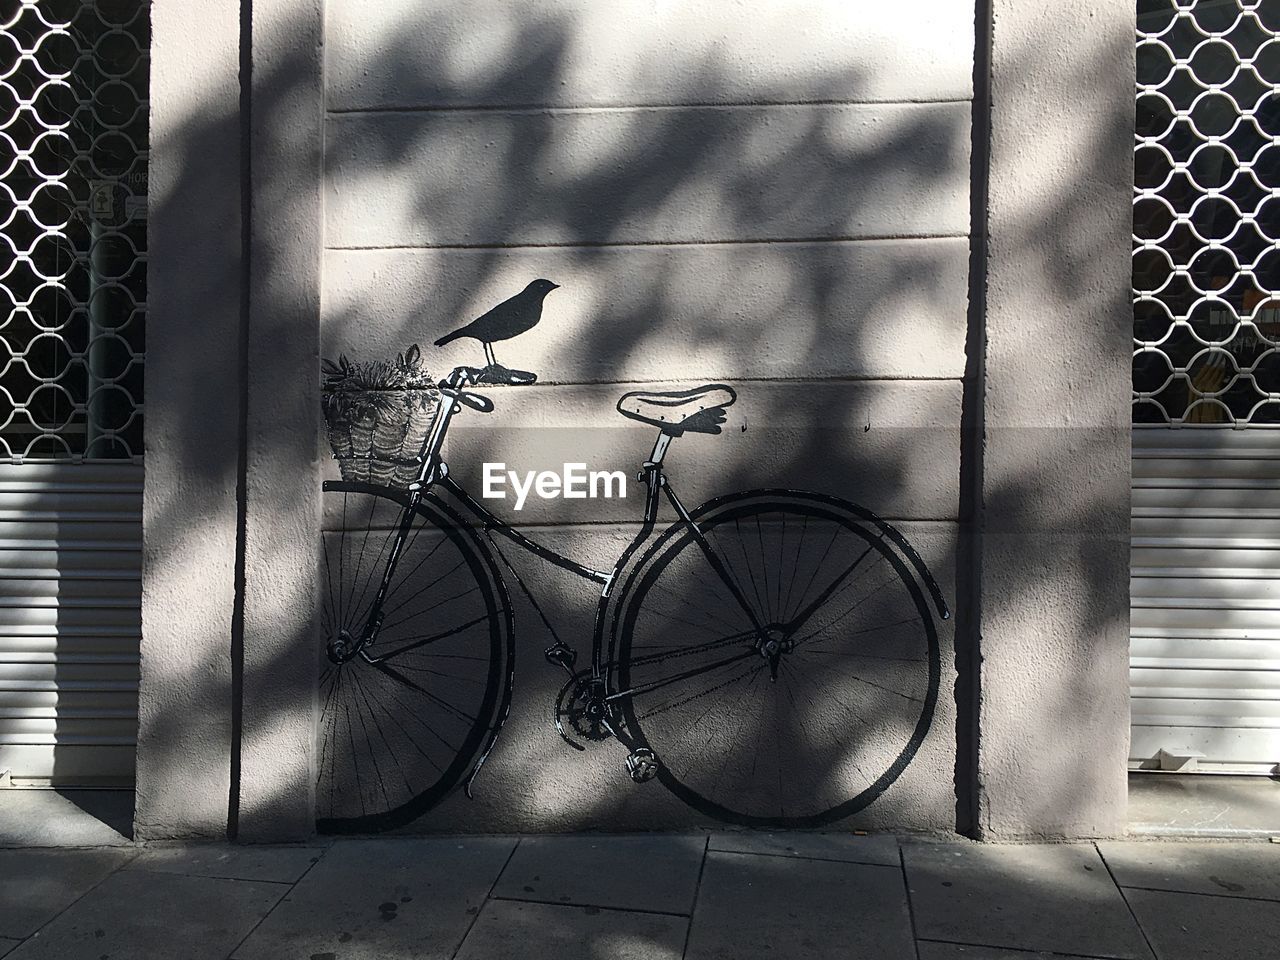 SHADOW OF BICYCLE ON METAL FENCE BY TILED FLOOR